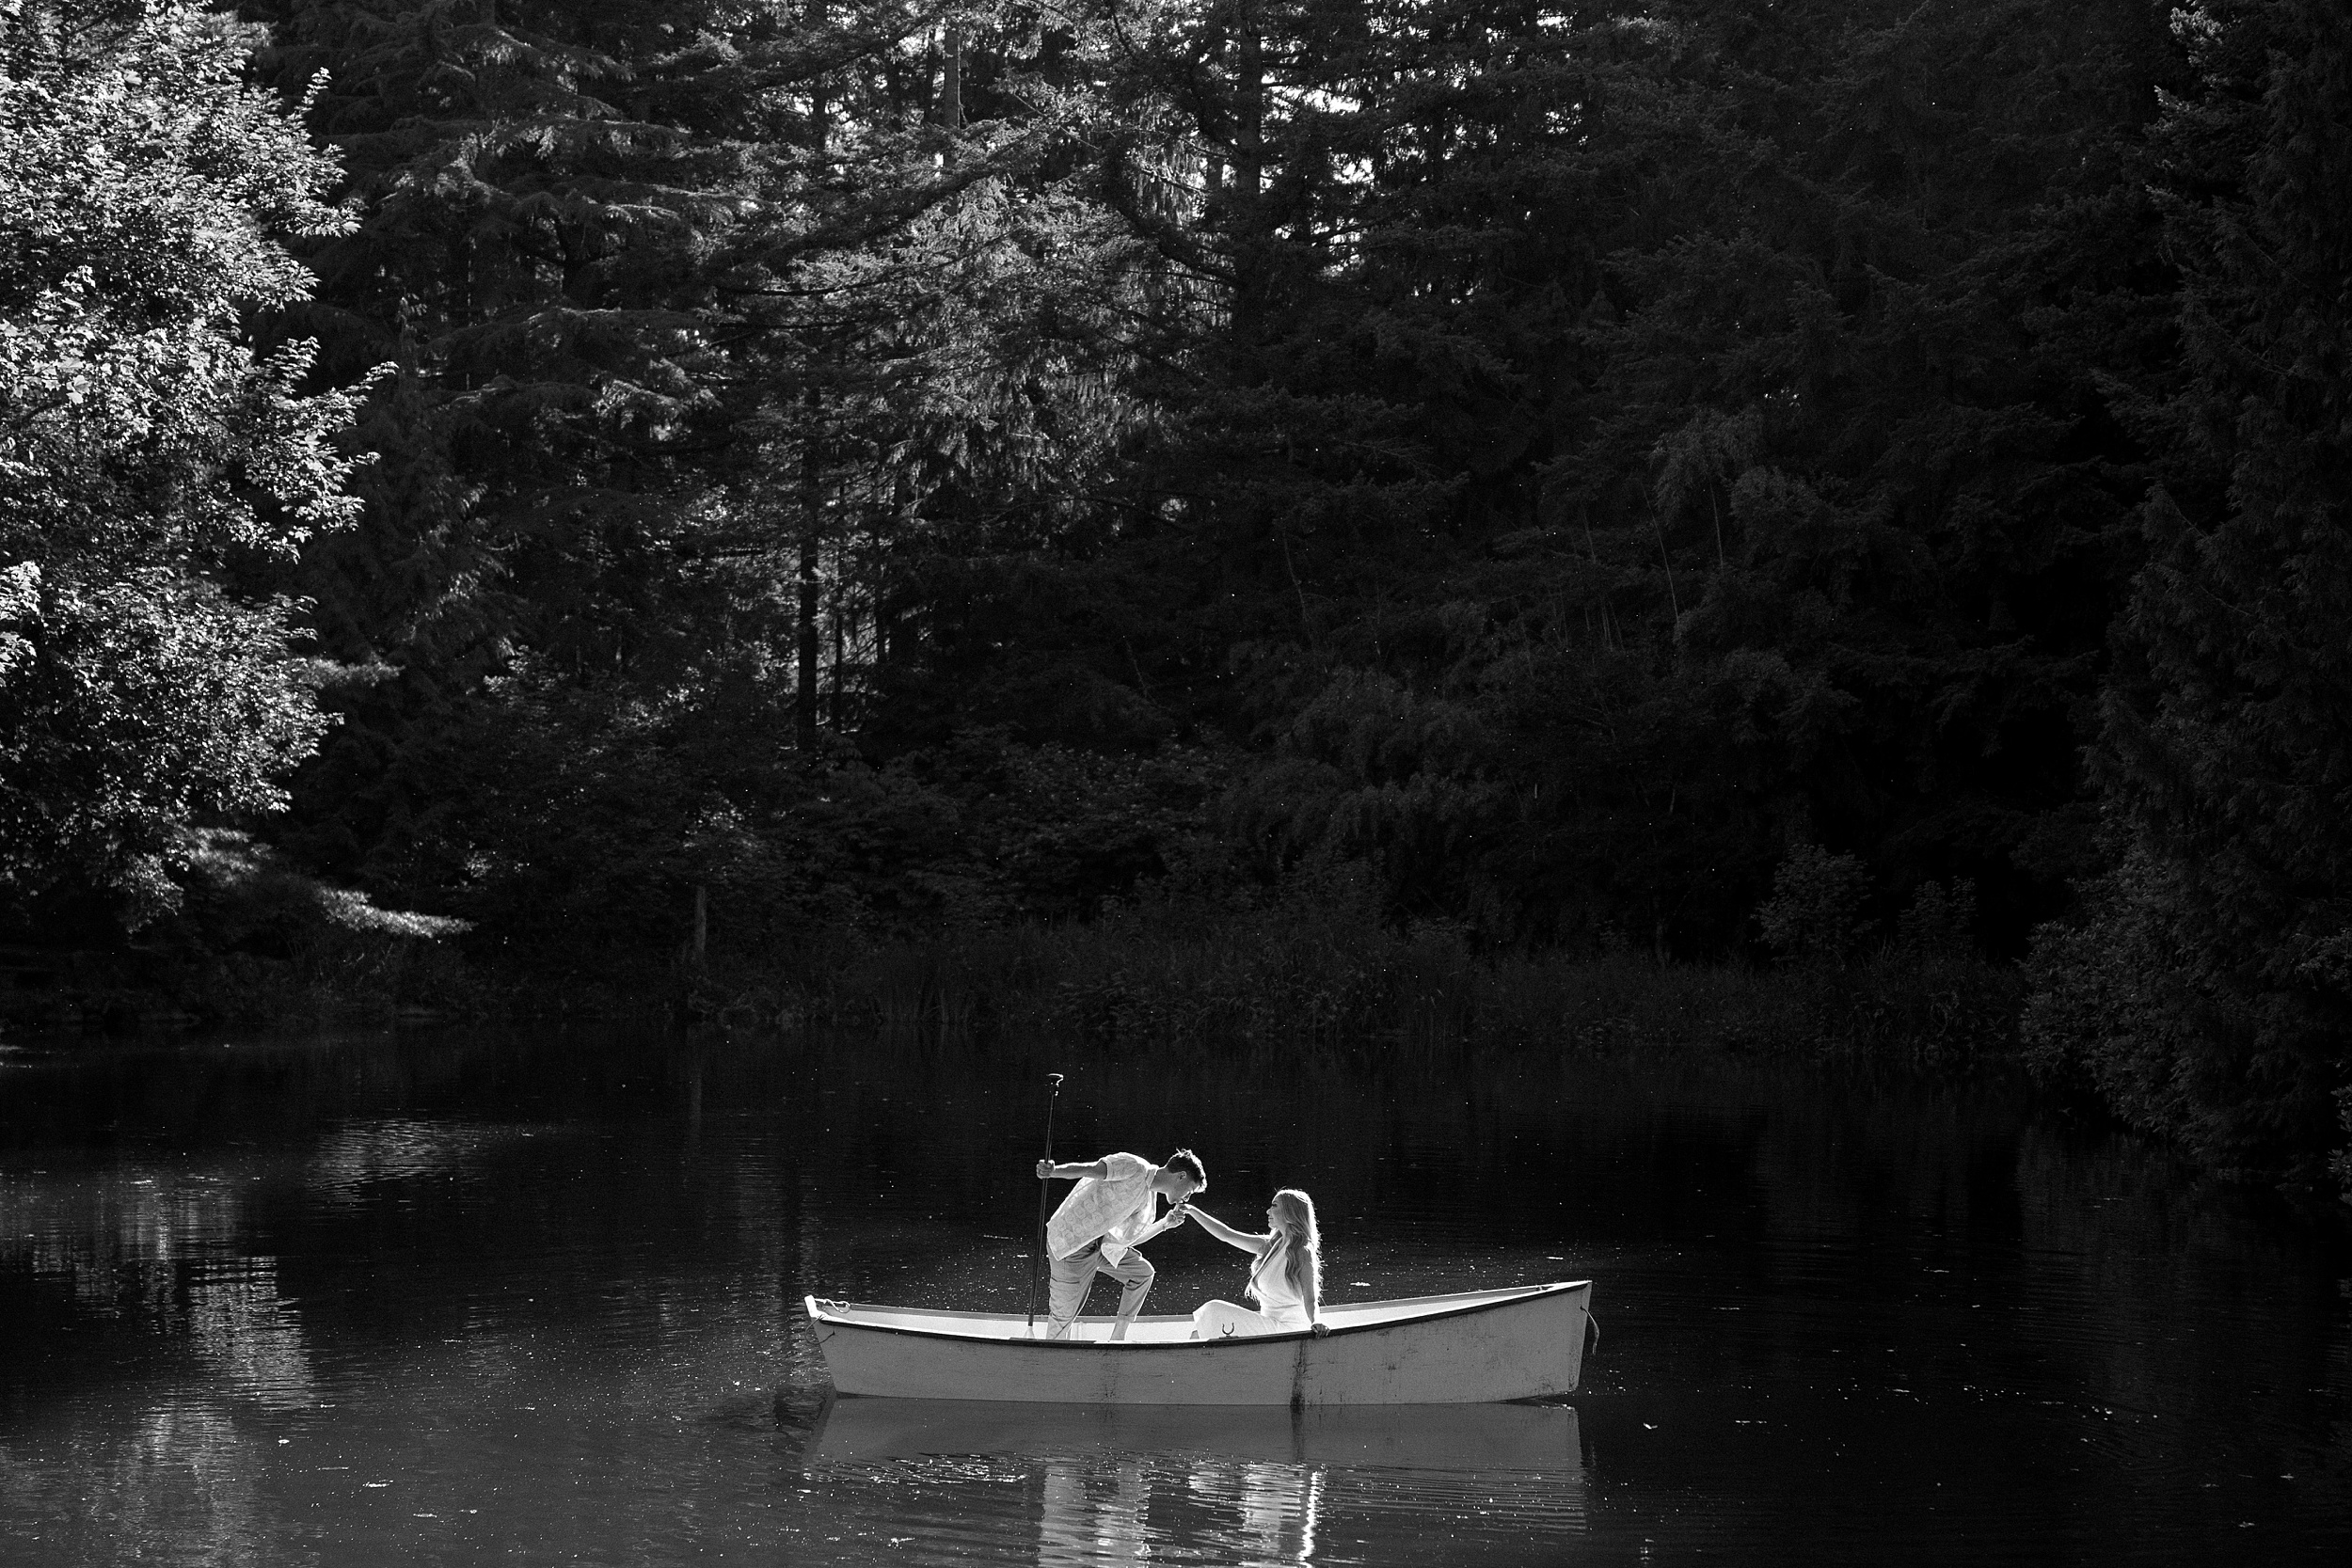 black and white picture of lake engagement photos in scenic greenery trees and a white small row boat